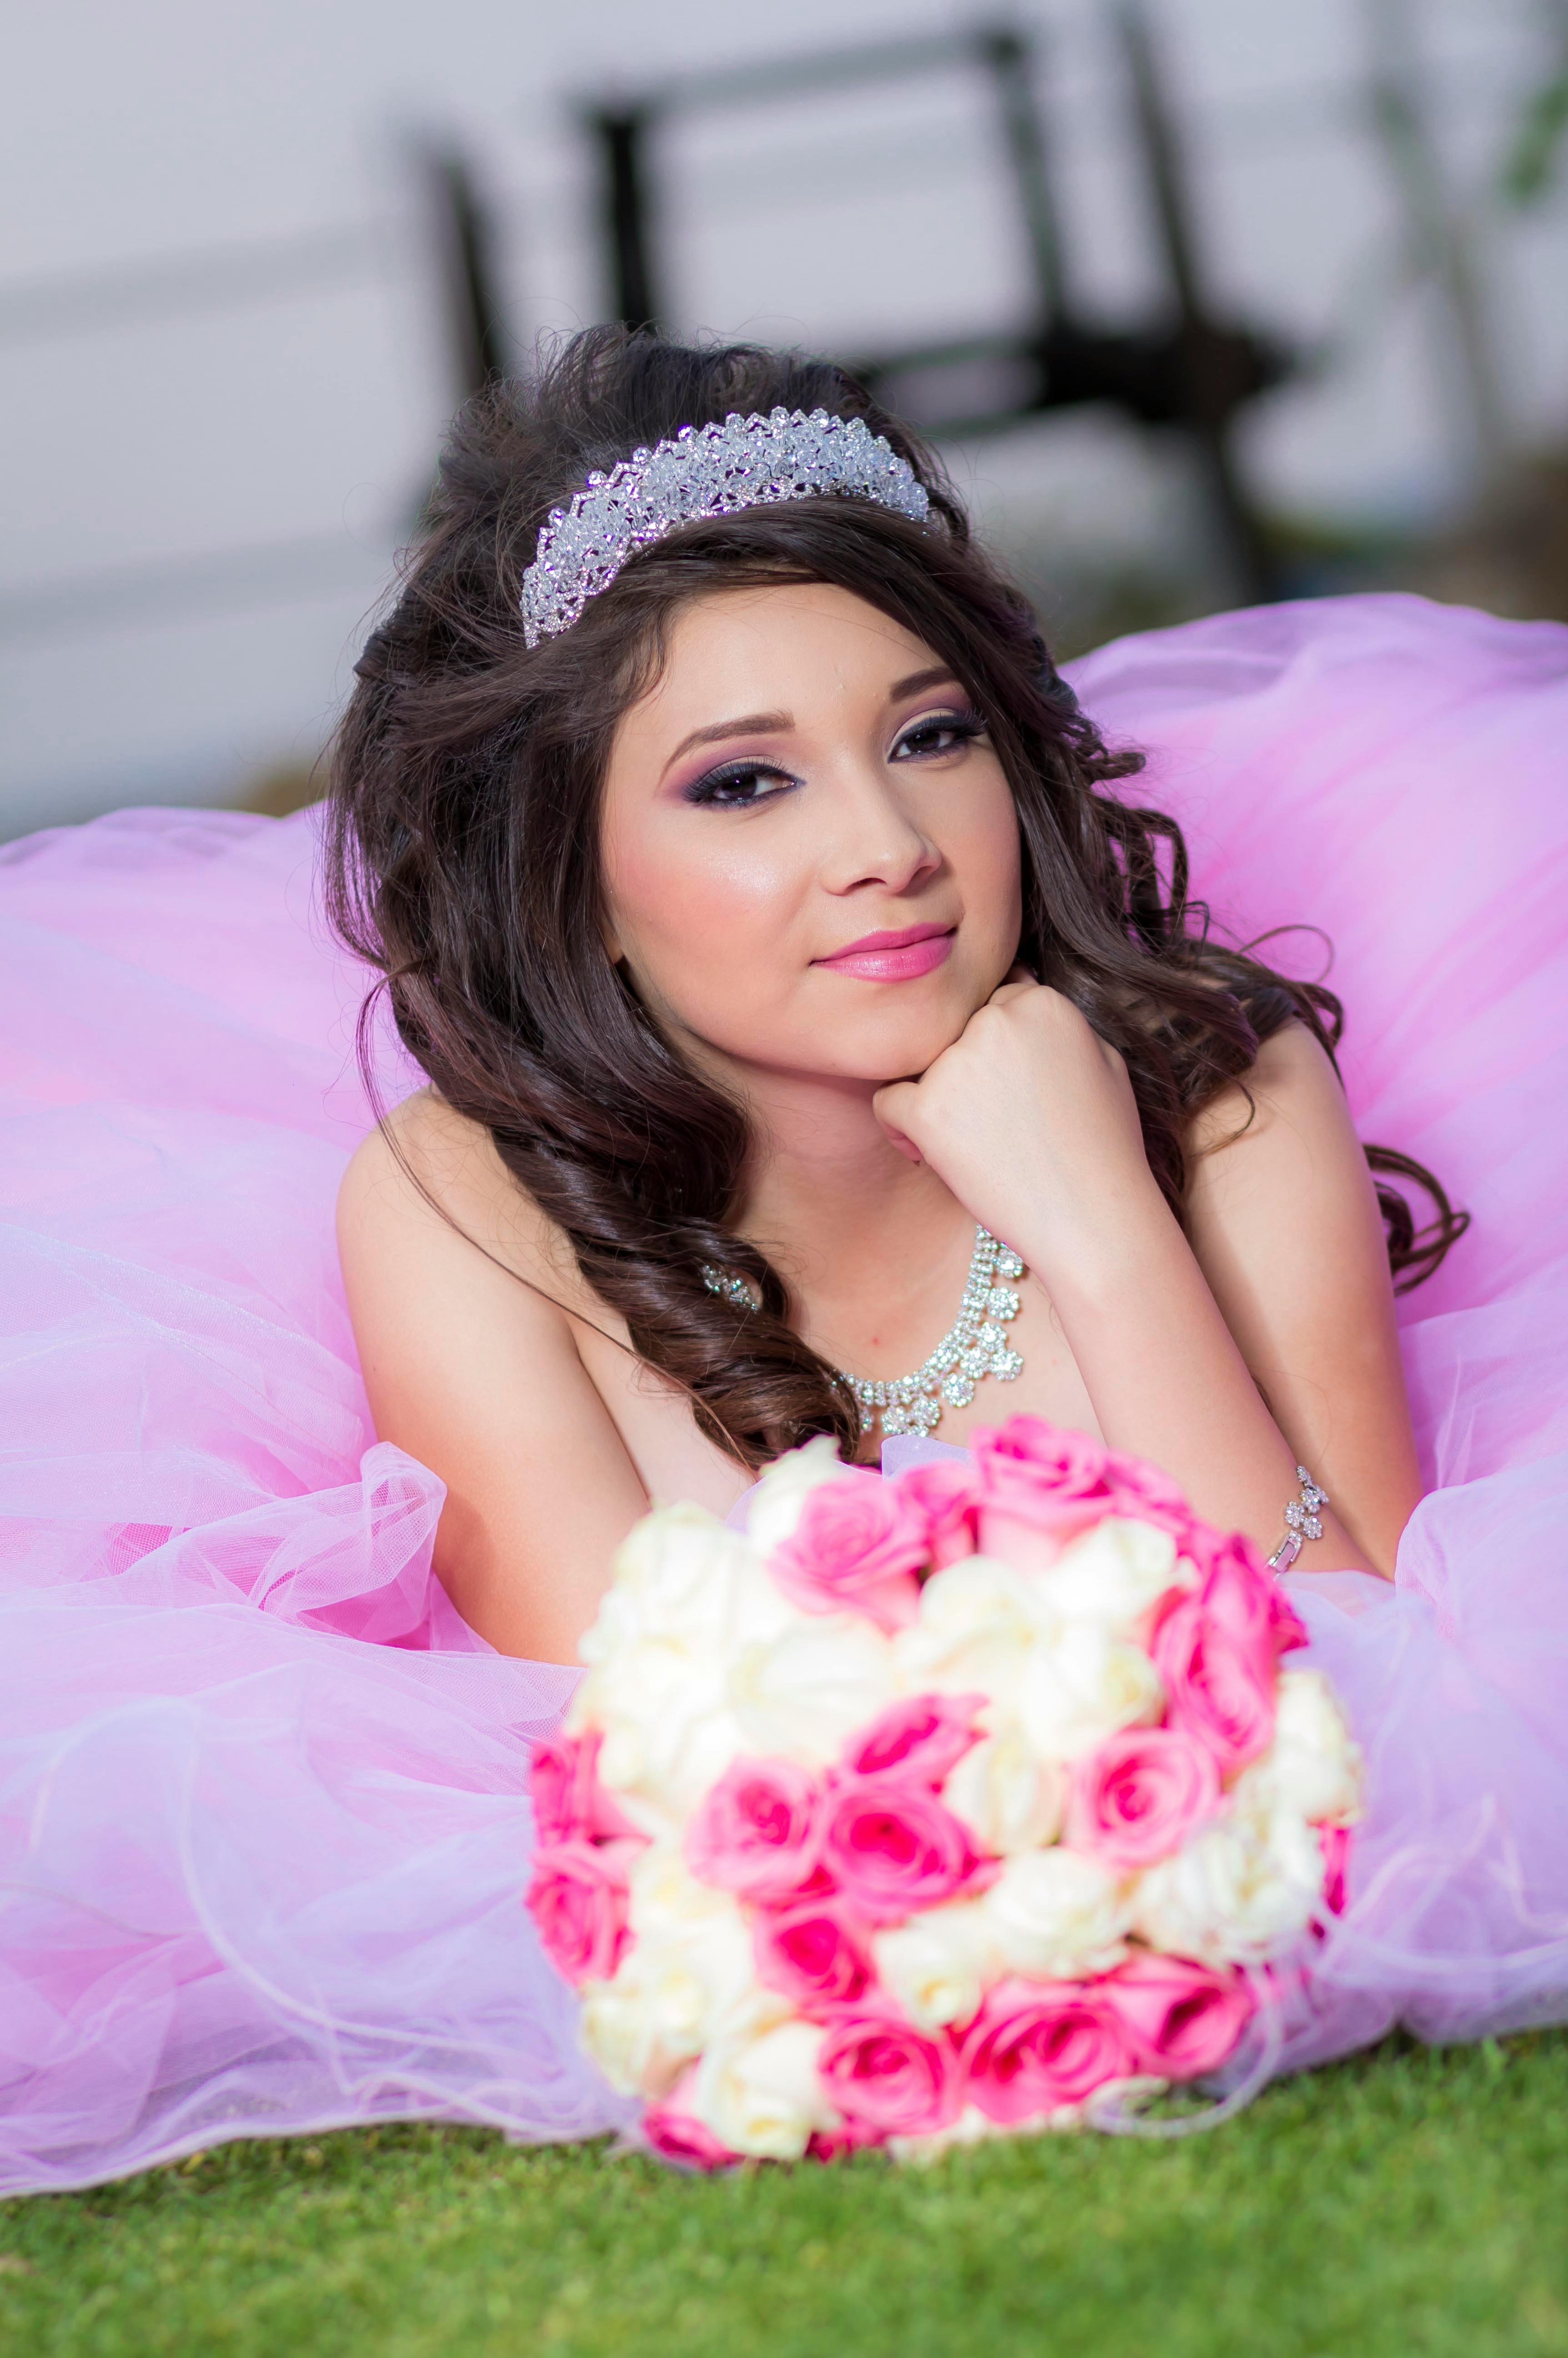 Students Celebrate 'Coming of Age' at Quinceañeras – The Native Voice